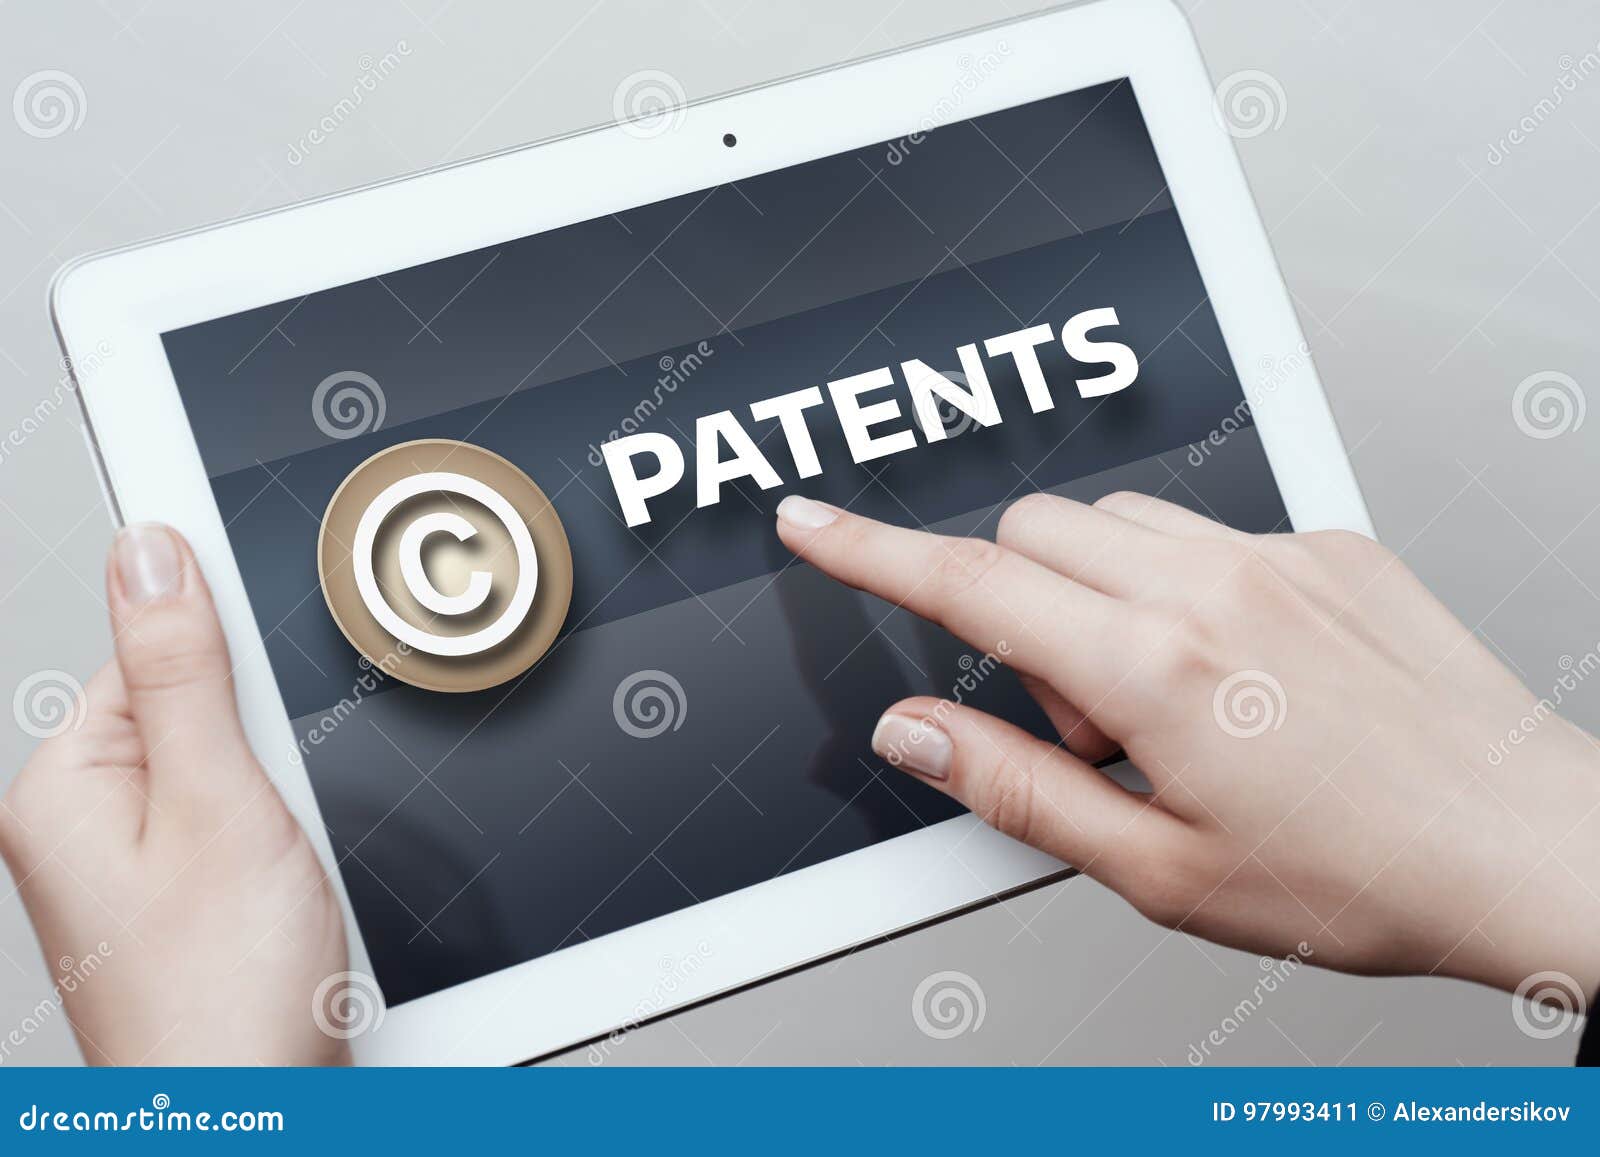 patent law copyright intellectual property business internet technology concept